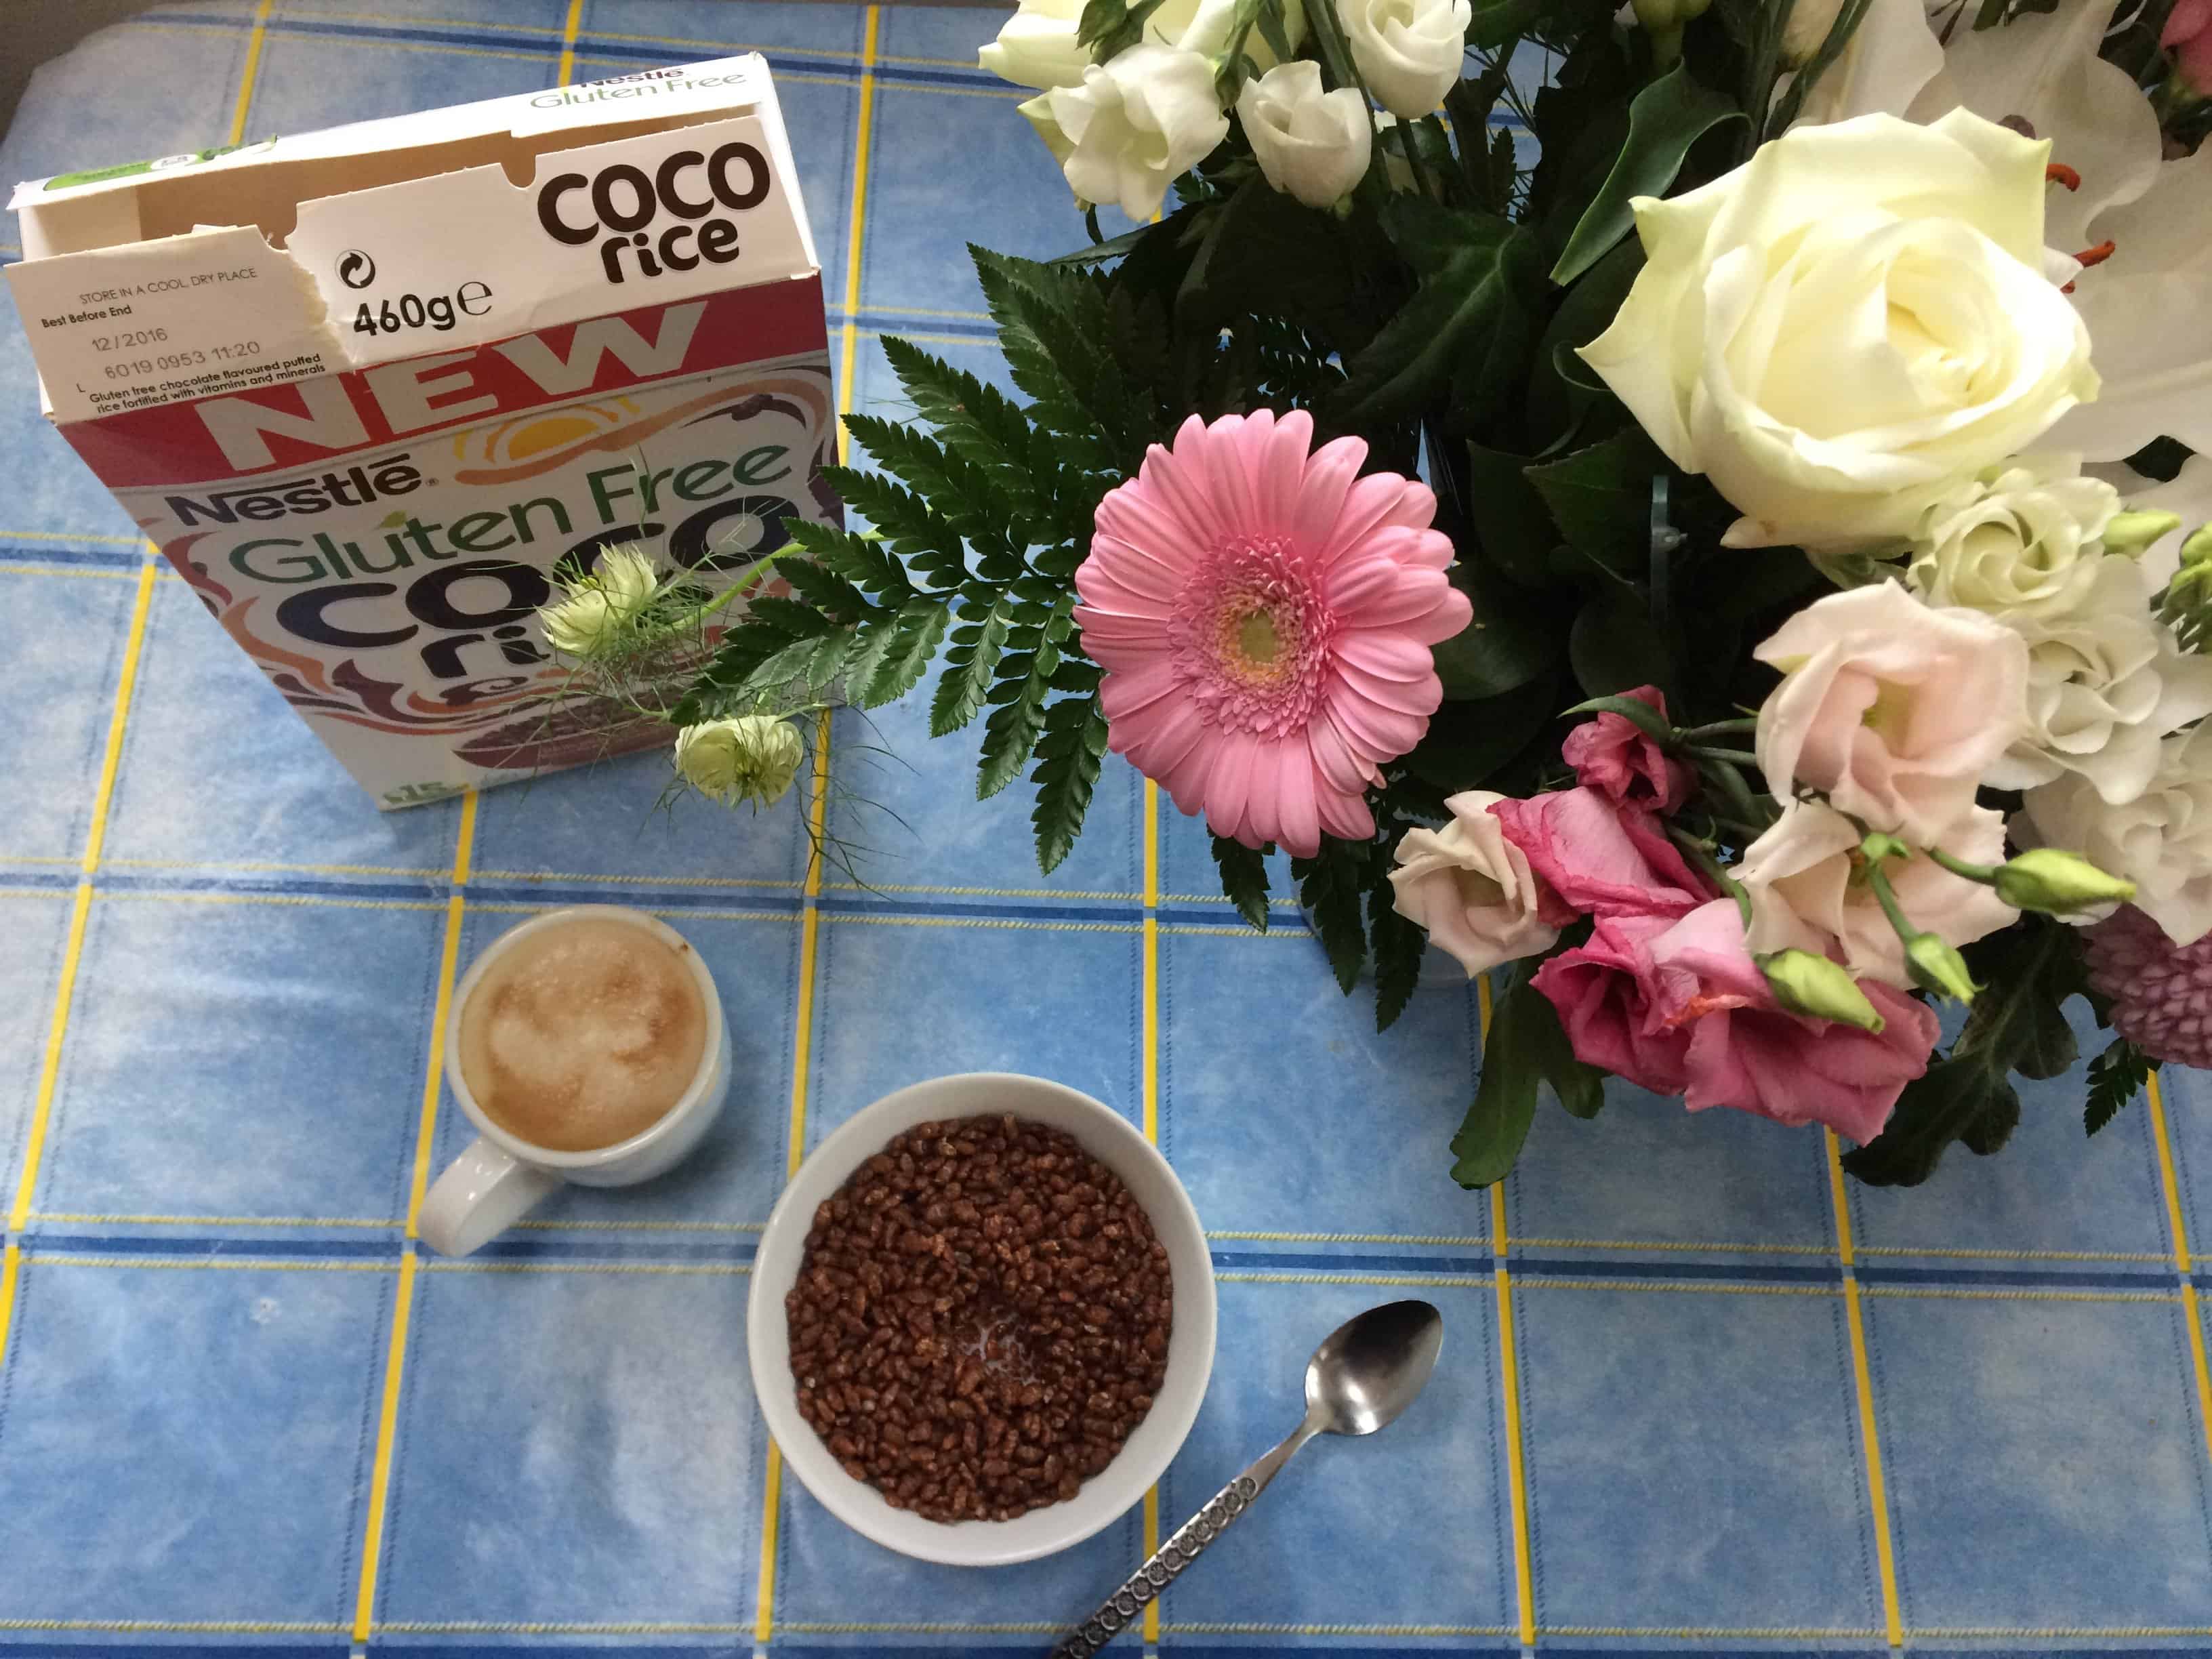 nestle gluten free cocopops and rice pops (2)